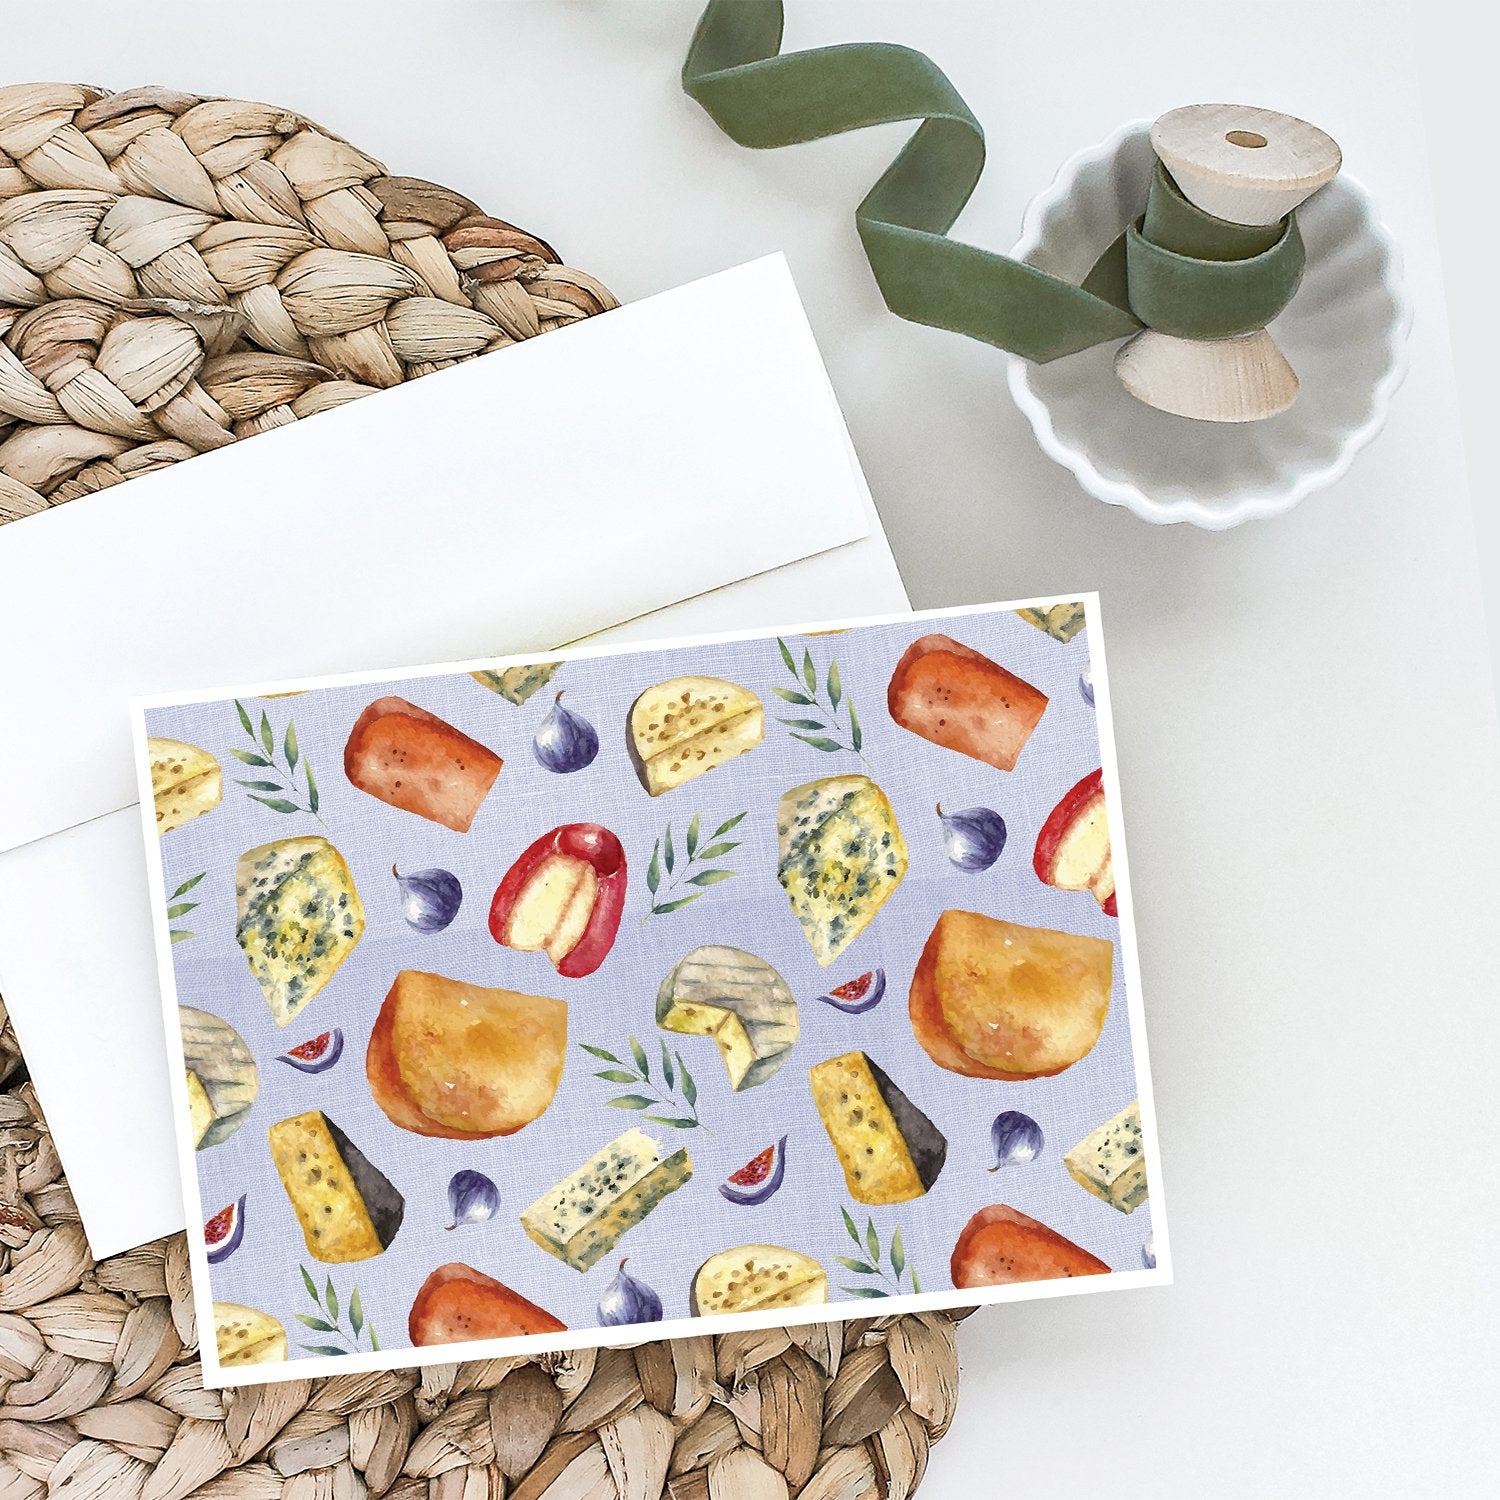 Buy this Assortment of Cheeses Greeting Cards and Envelopes Pack of 8